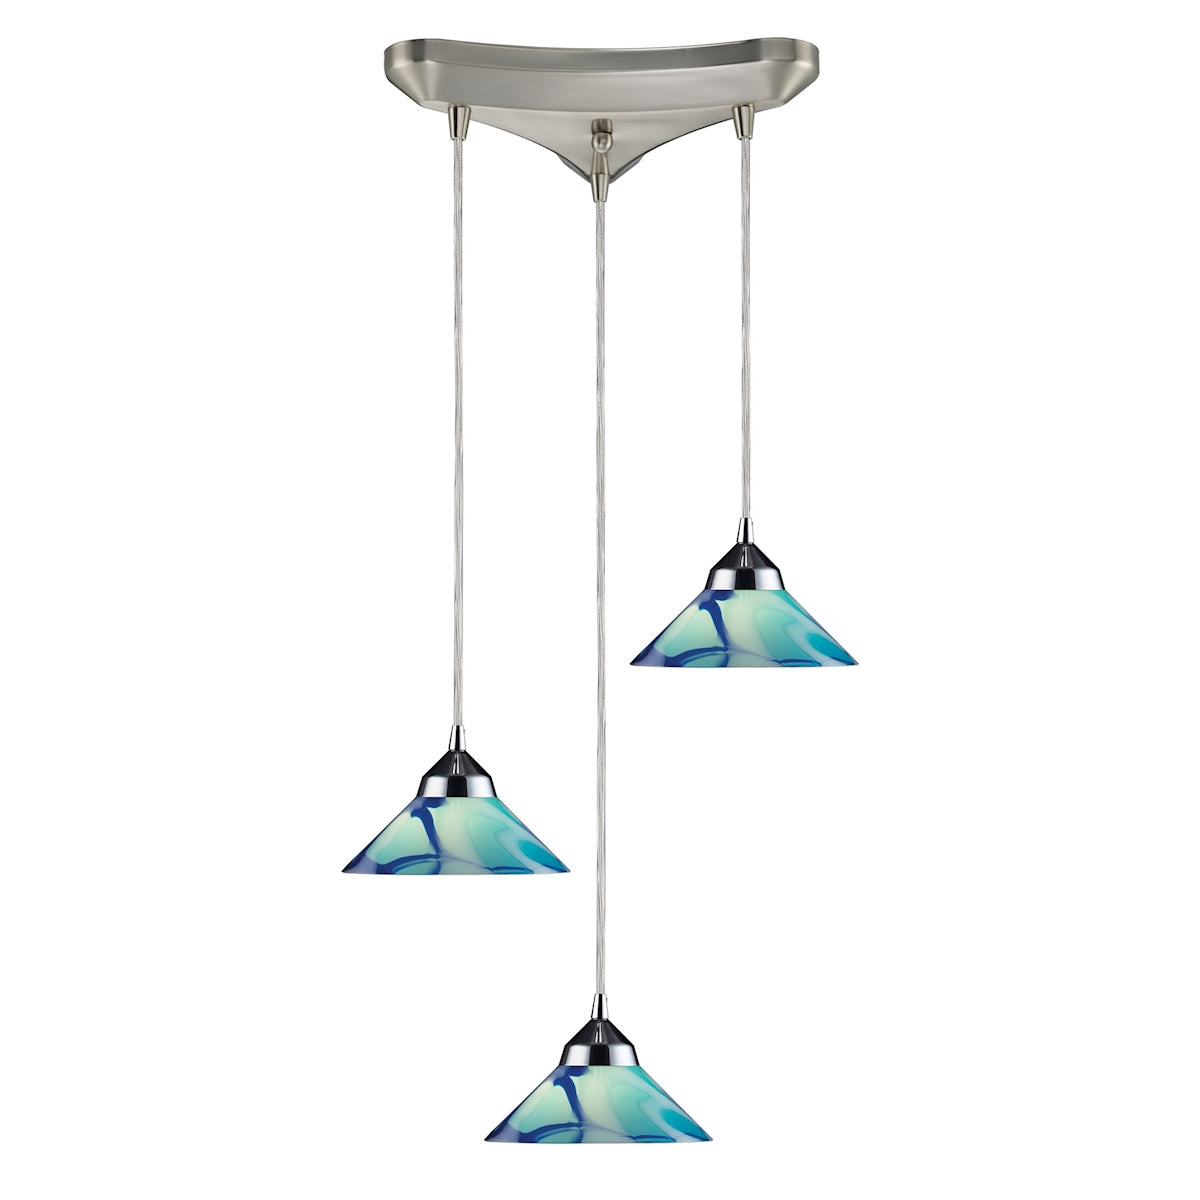 ELK Lighting 1477/3CAR Refraction 3-Light Triangular Pendant Fixture in Polished Chrome with Caribbean Glass